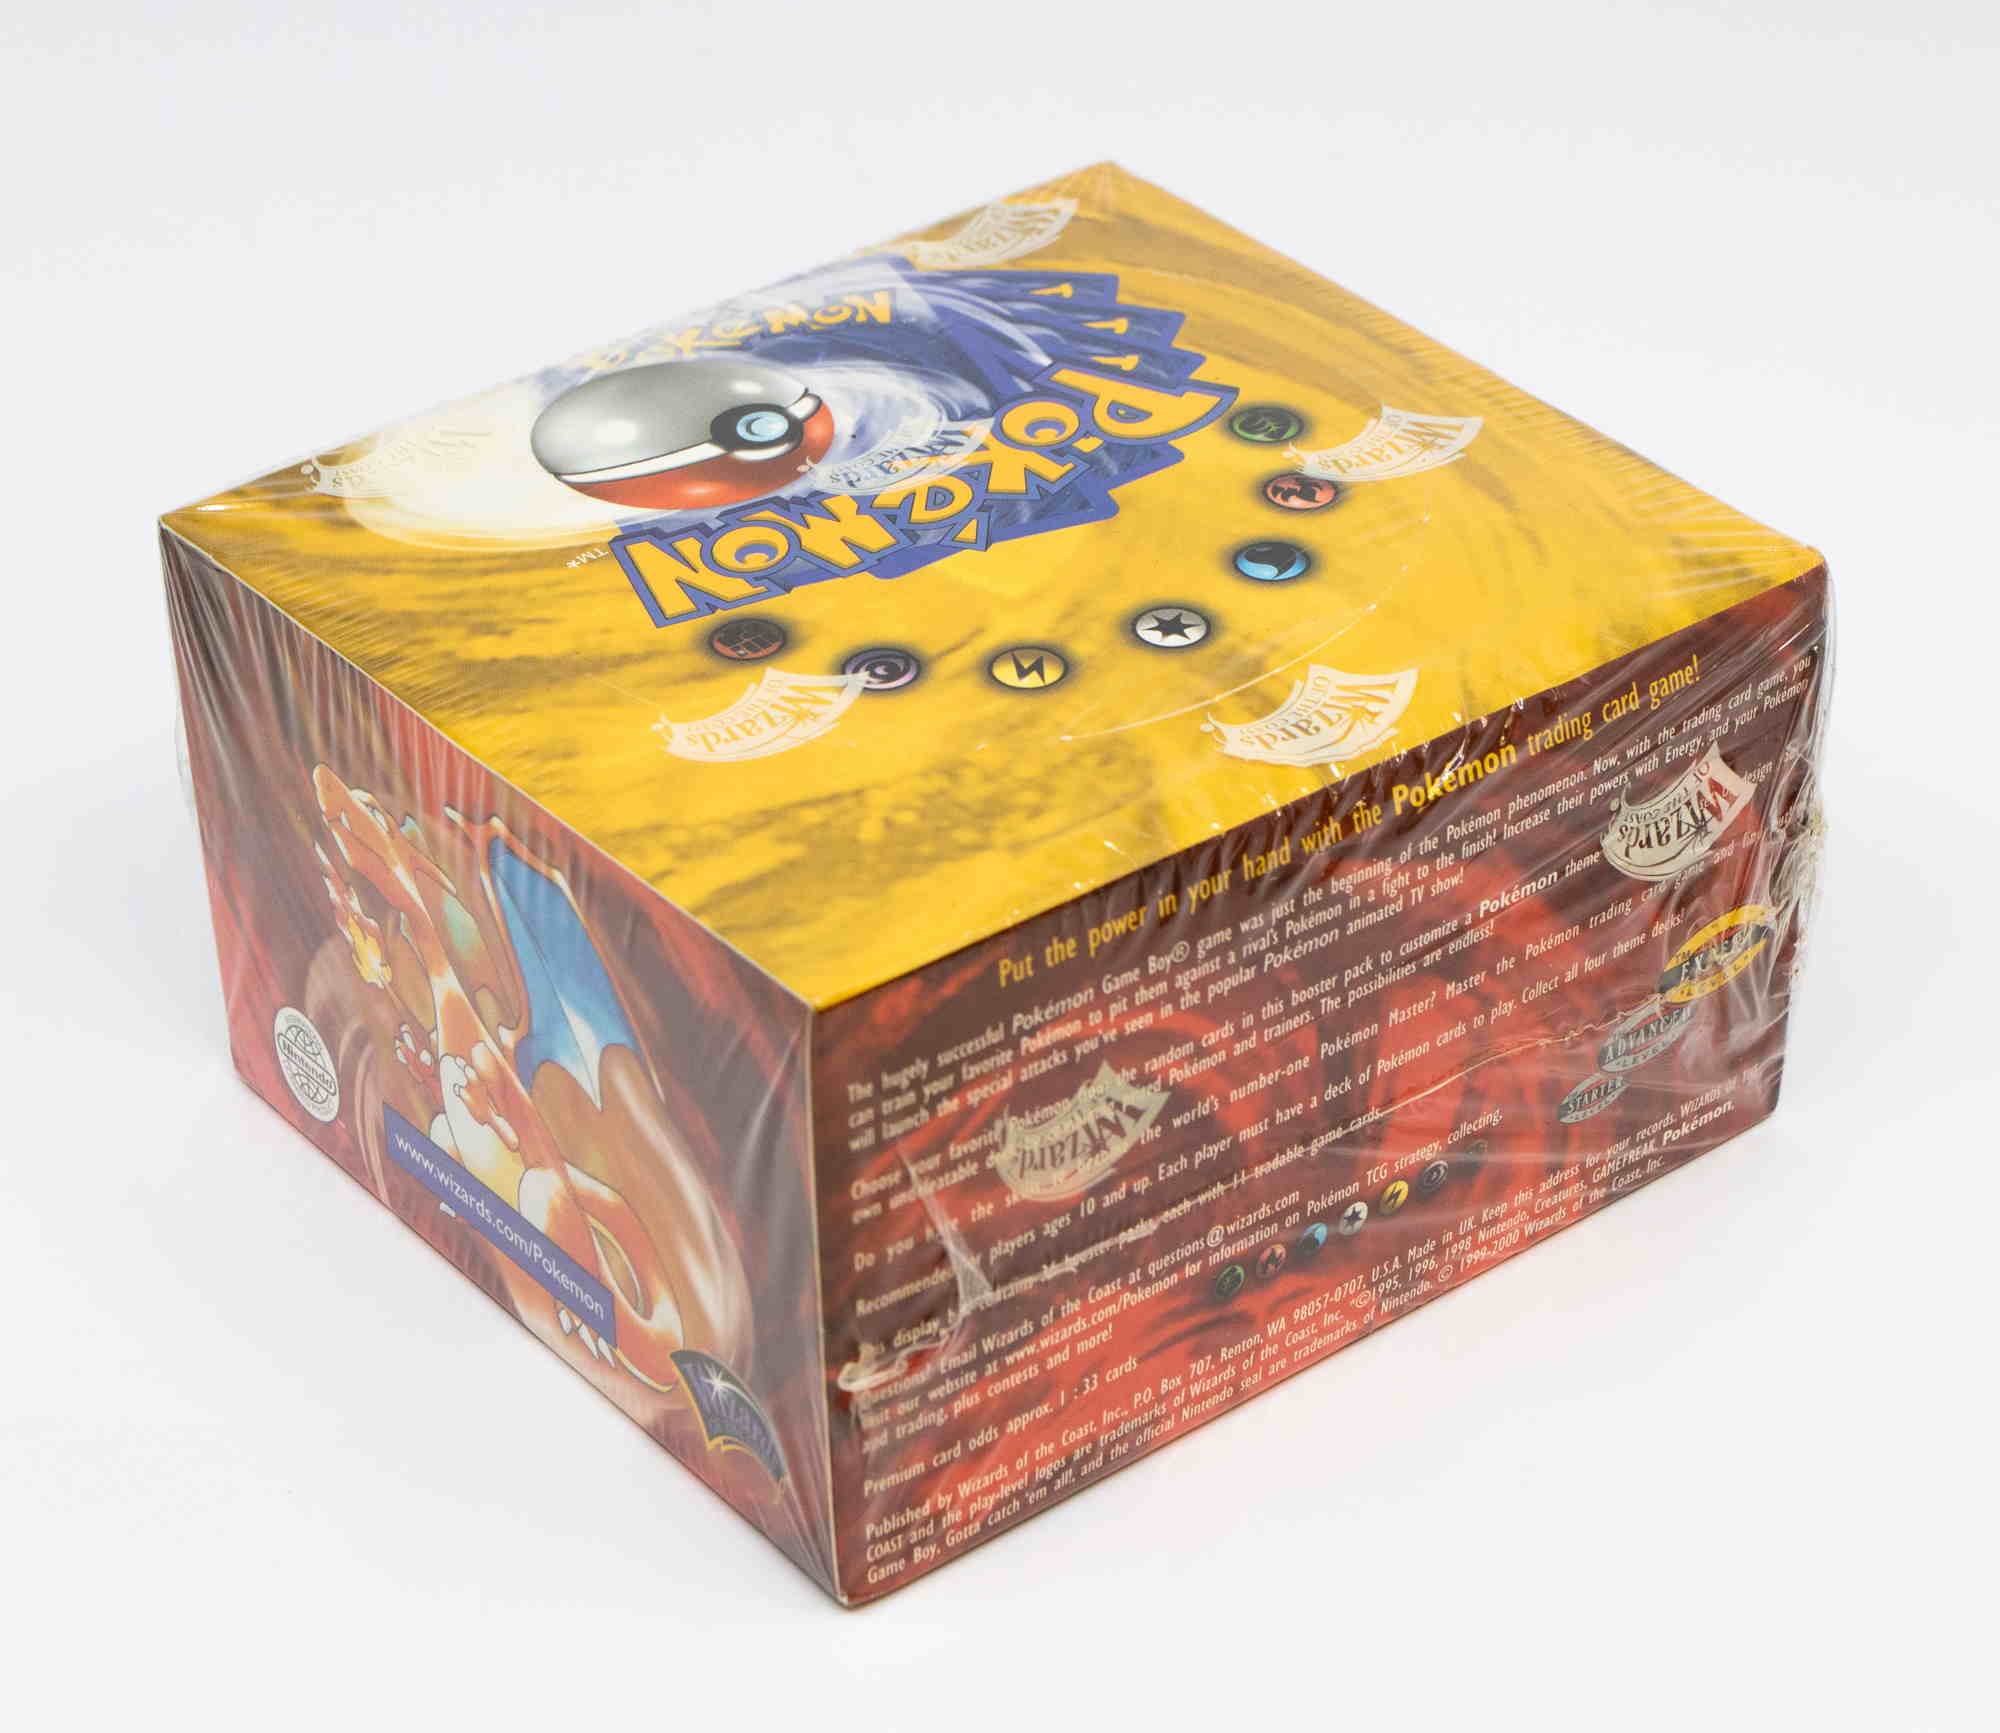 Pokémon Fourth Print Base Set Booster Box, estimated value £16,000-£20,000. Picture credit: Hansons Auctioneers.